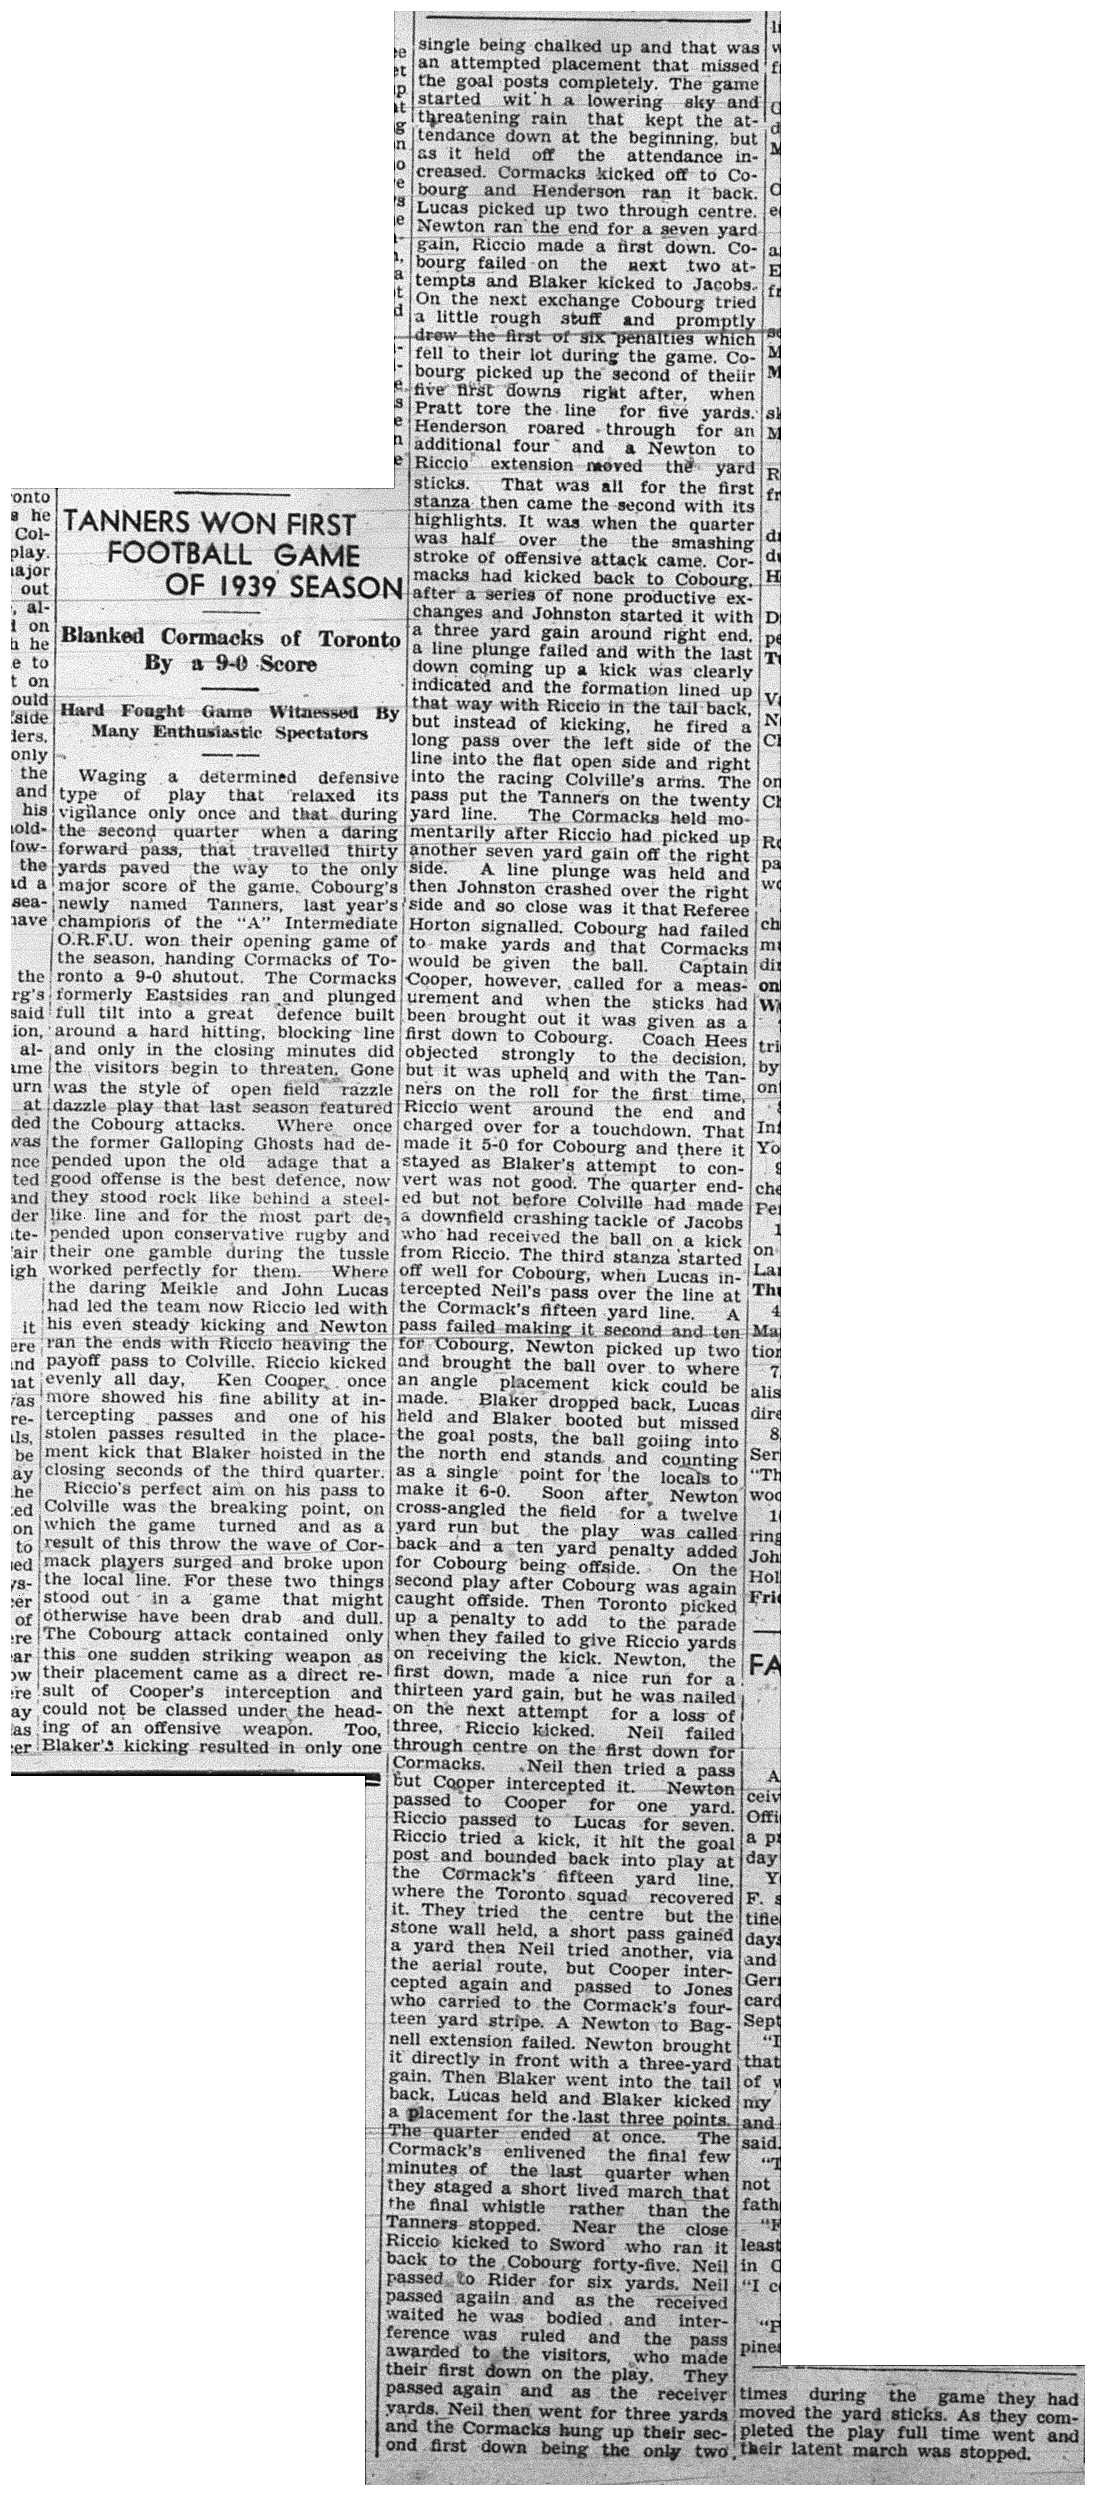 1939-10-12 Football -Cobourg Tanners win vs TO Cormacks